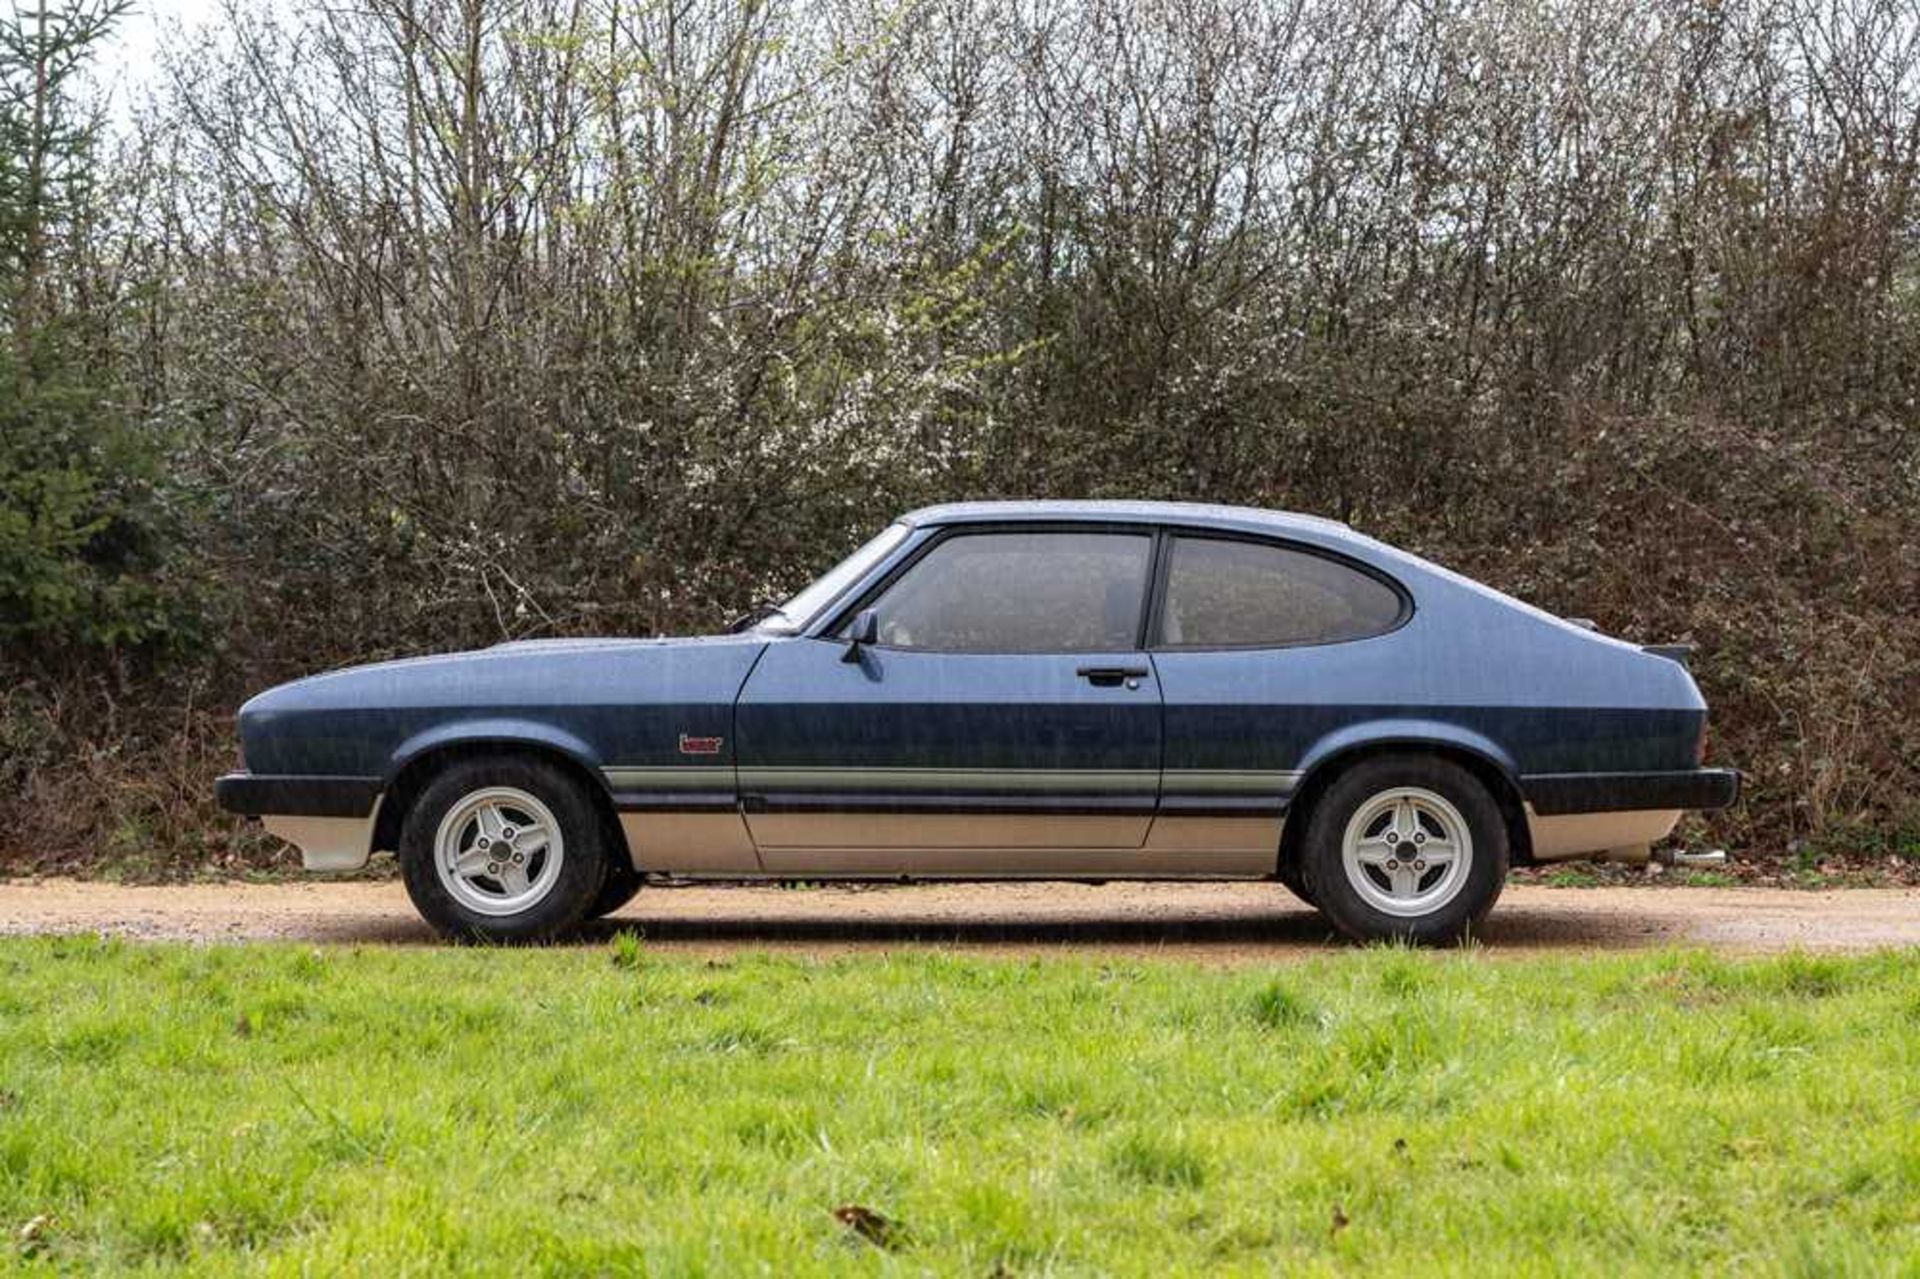 1985 Ford Capri Laser 2.0 Litre Warranted 55,300 miles from new - Image 19 of 67